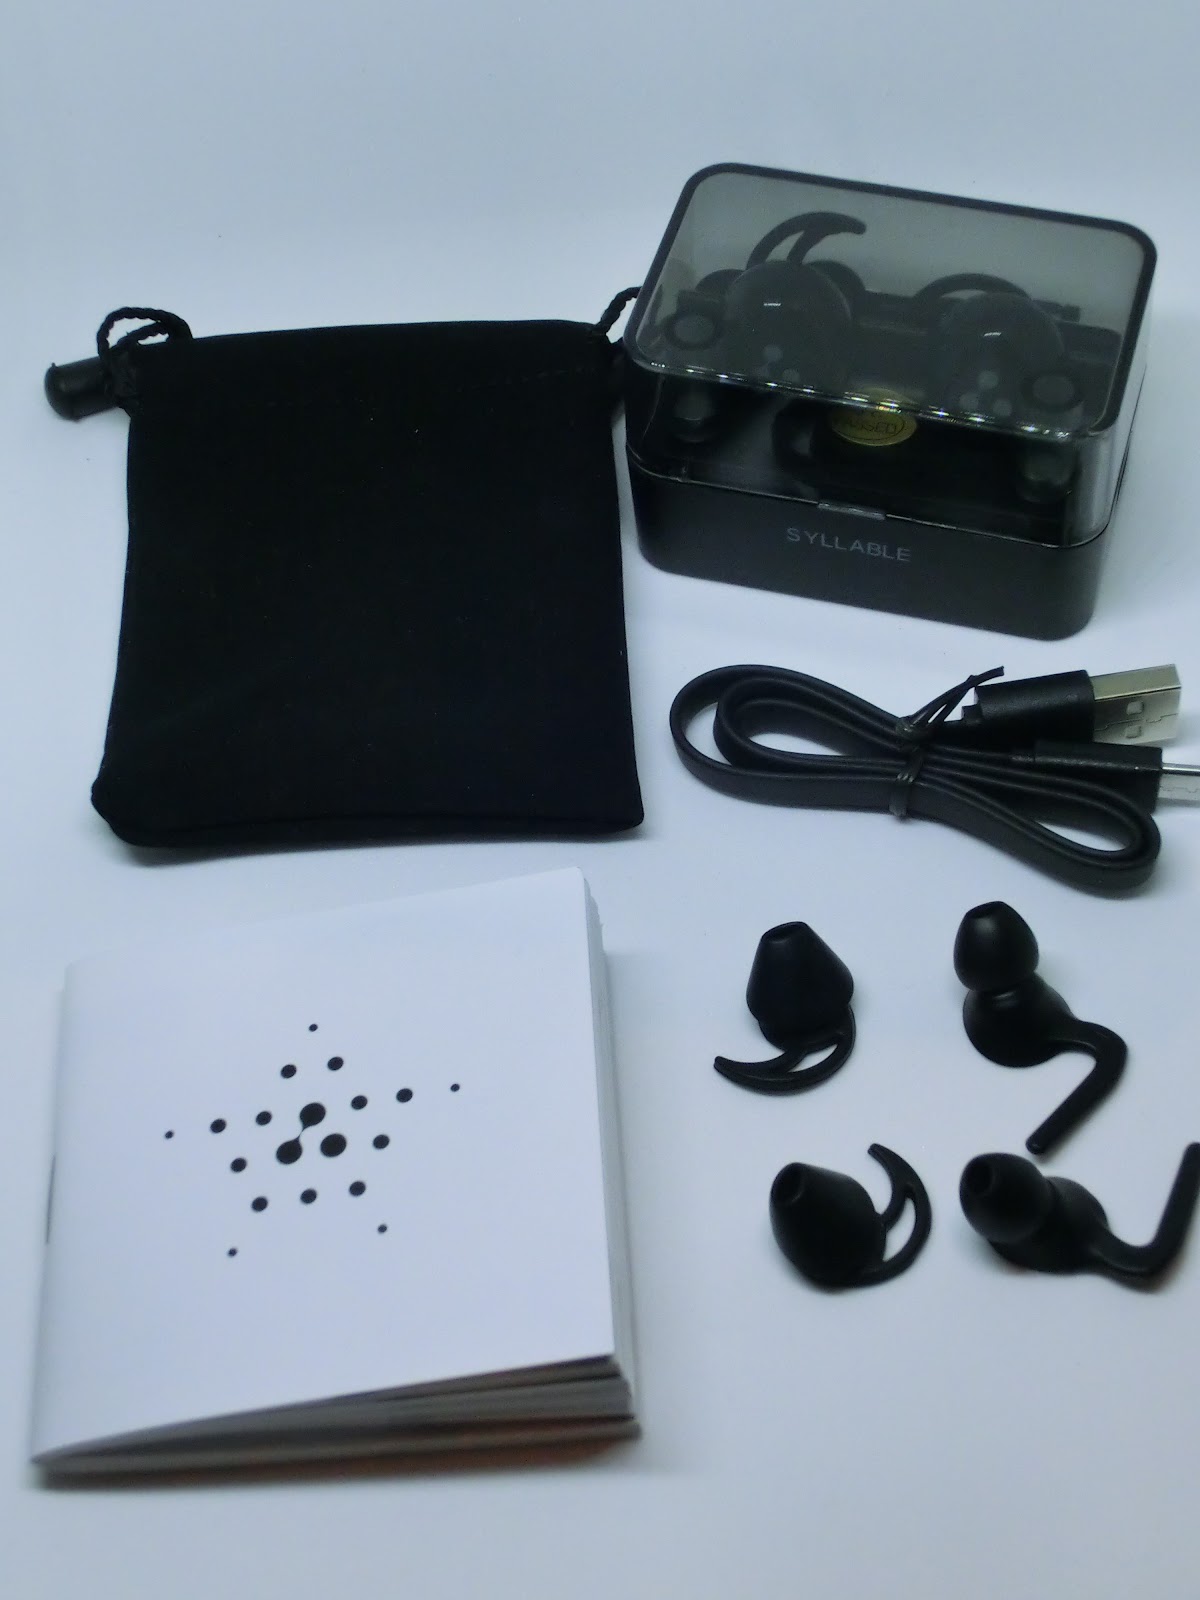 [REVIEW] Syllable D900MINI (Mini Auriculares Bluetooth)